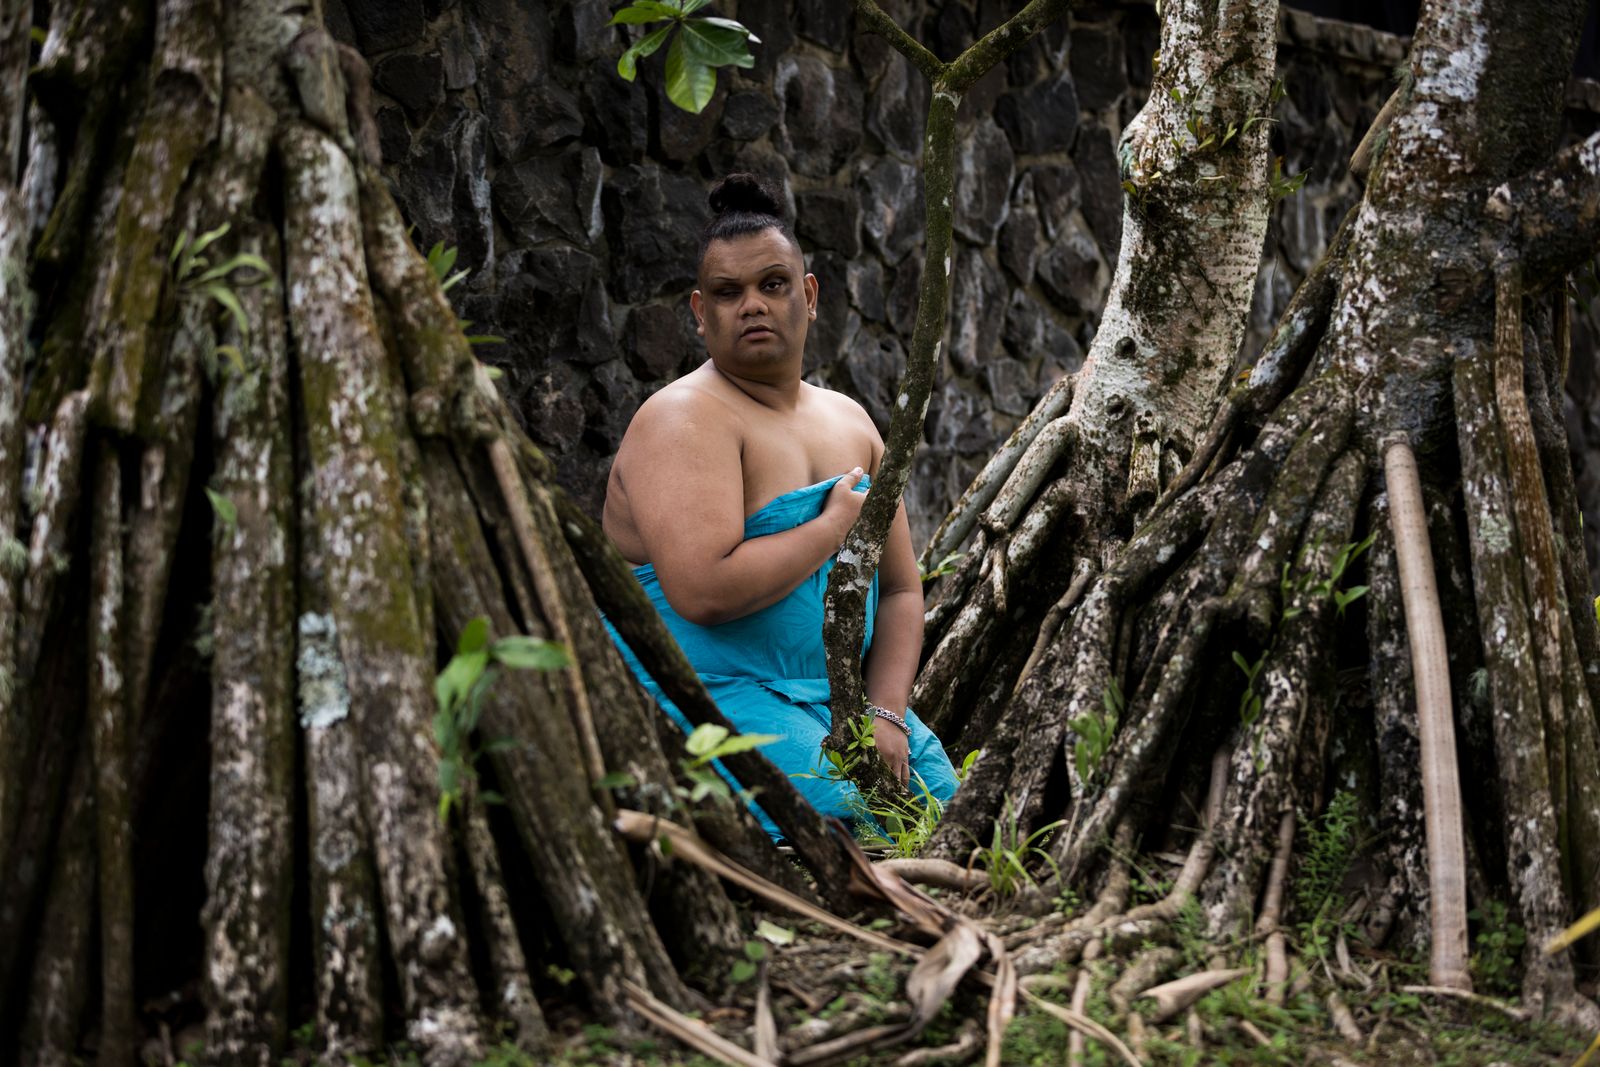 © Sebastien Lebegue - Image from the Transgender idendity in the Pacific area. photography project